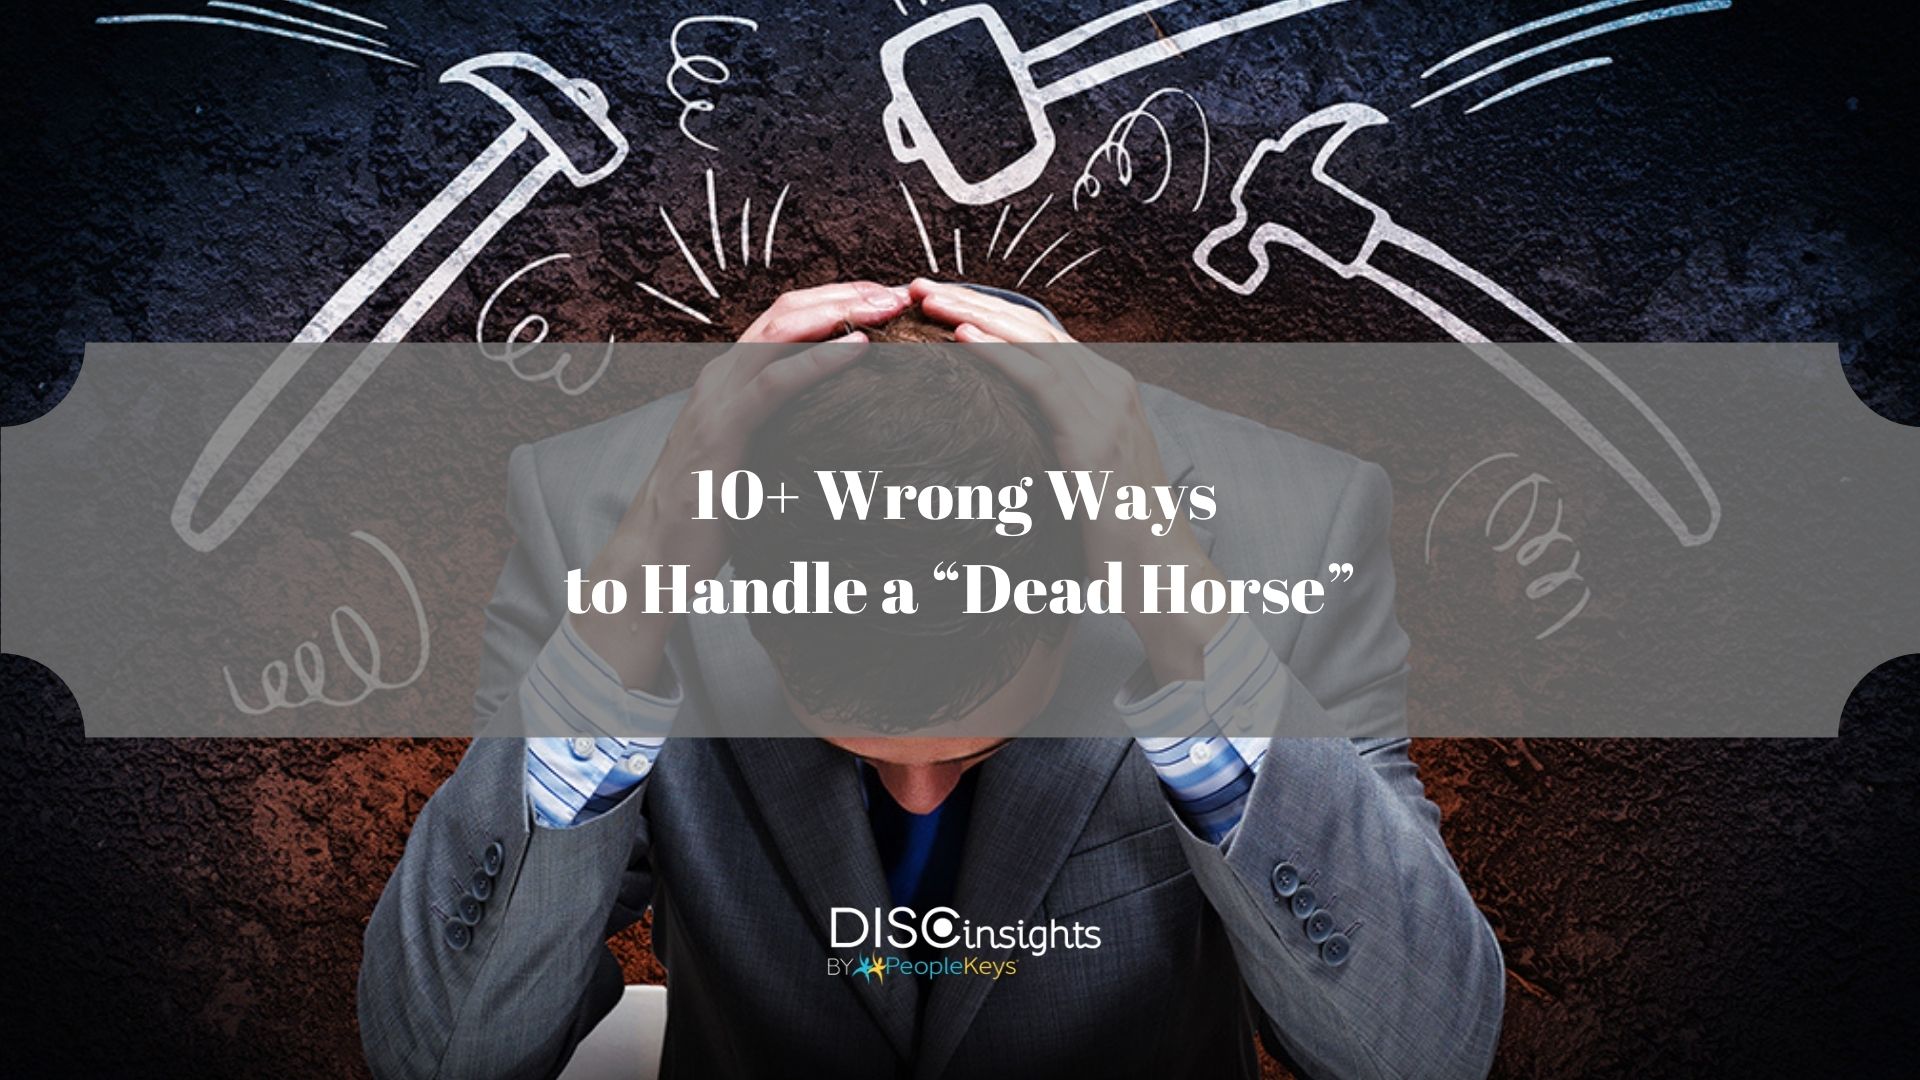 10+ Wrong Ways to Handle a “Dead Horse”